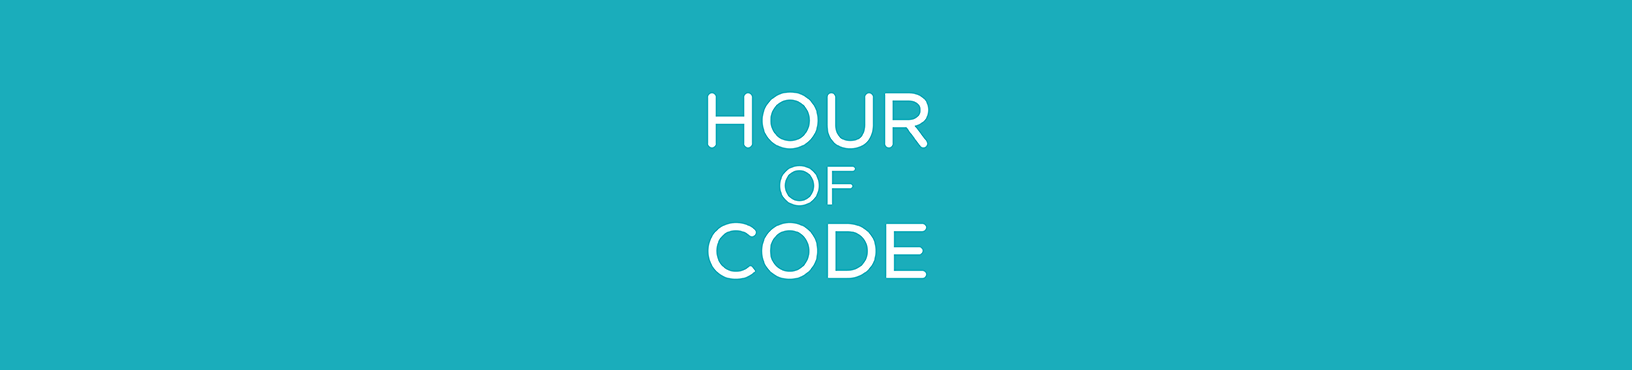 Learn Basic Lua Coding This Week In Our Hour Of Code Event Roblox Blog - lua roblox code